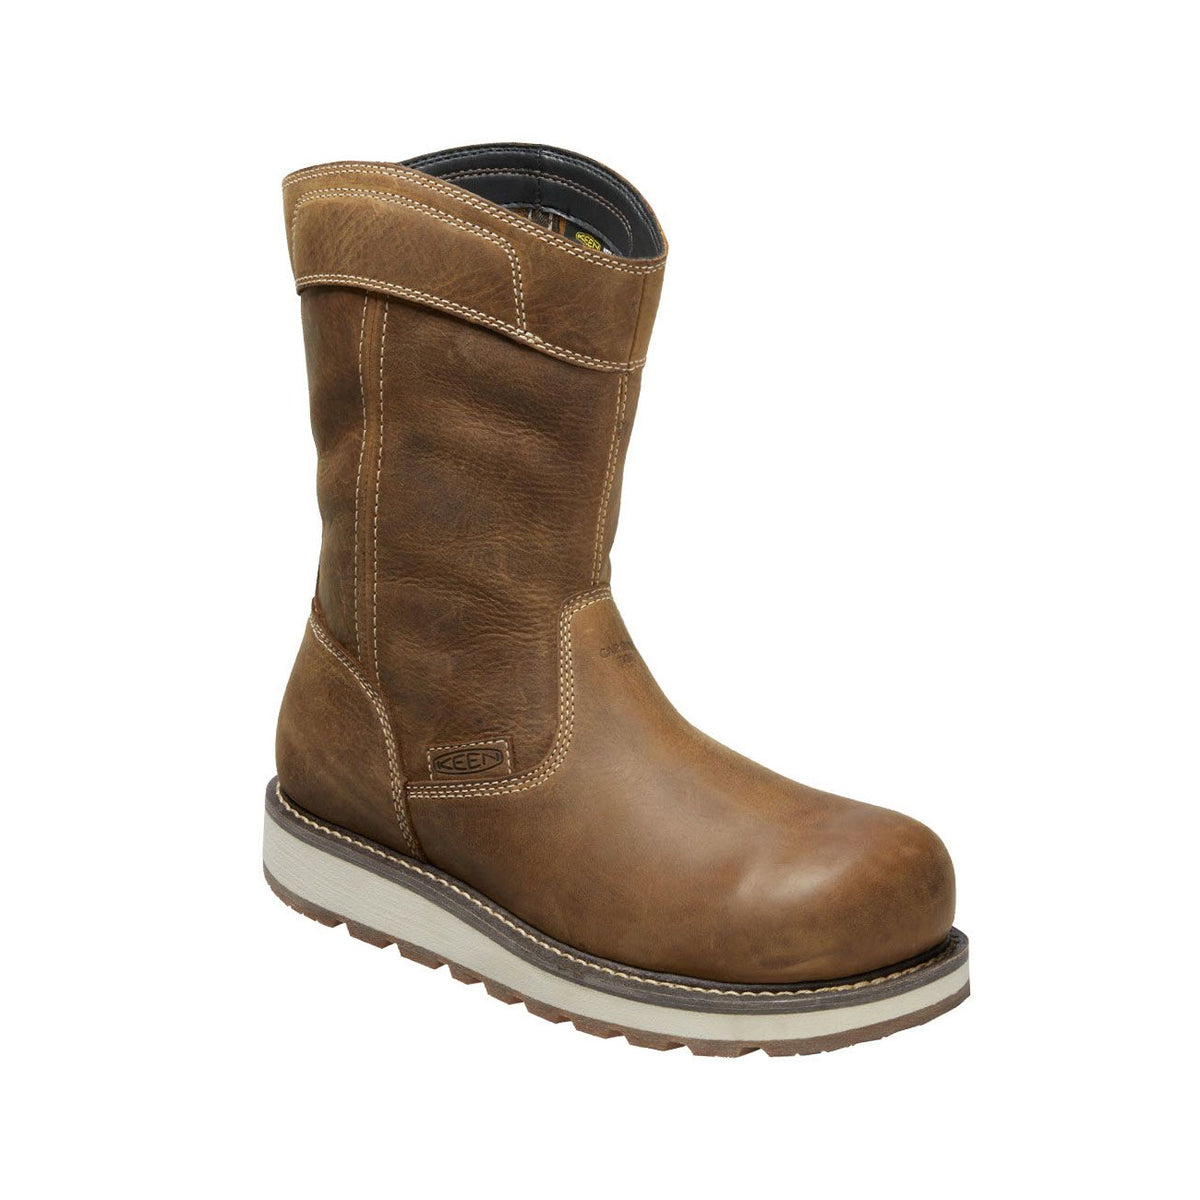 Side view of a brown leather Keen work boot with a thick rubber sole, featuring an embossed logo on the shaft.